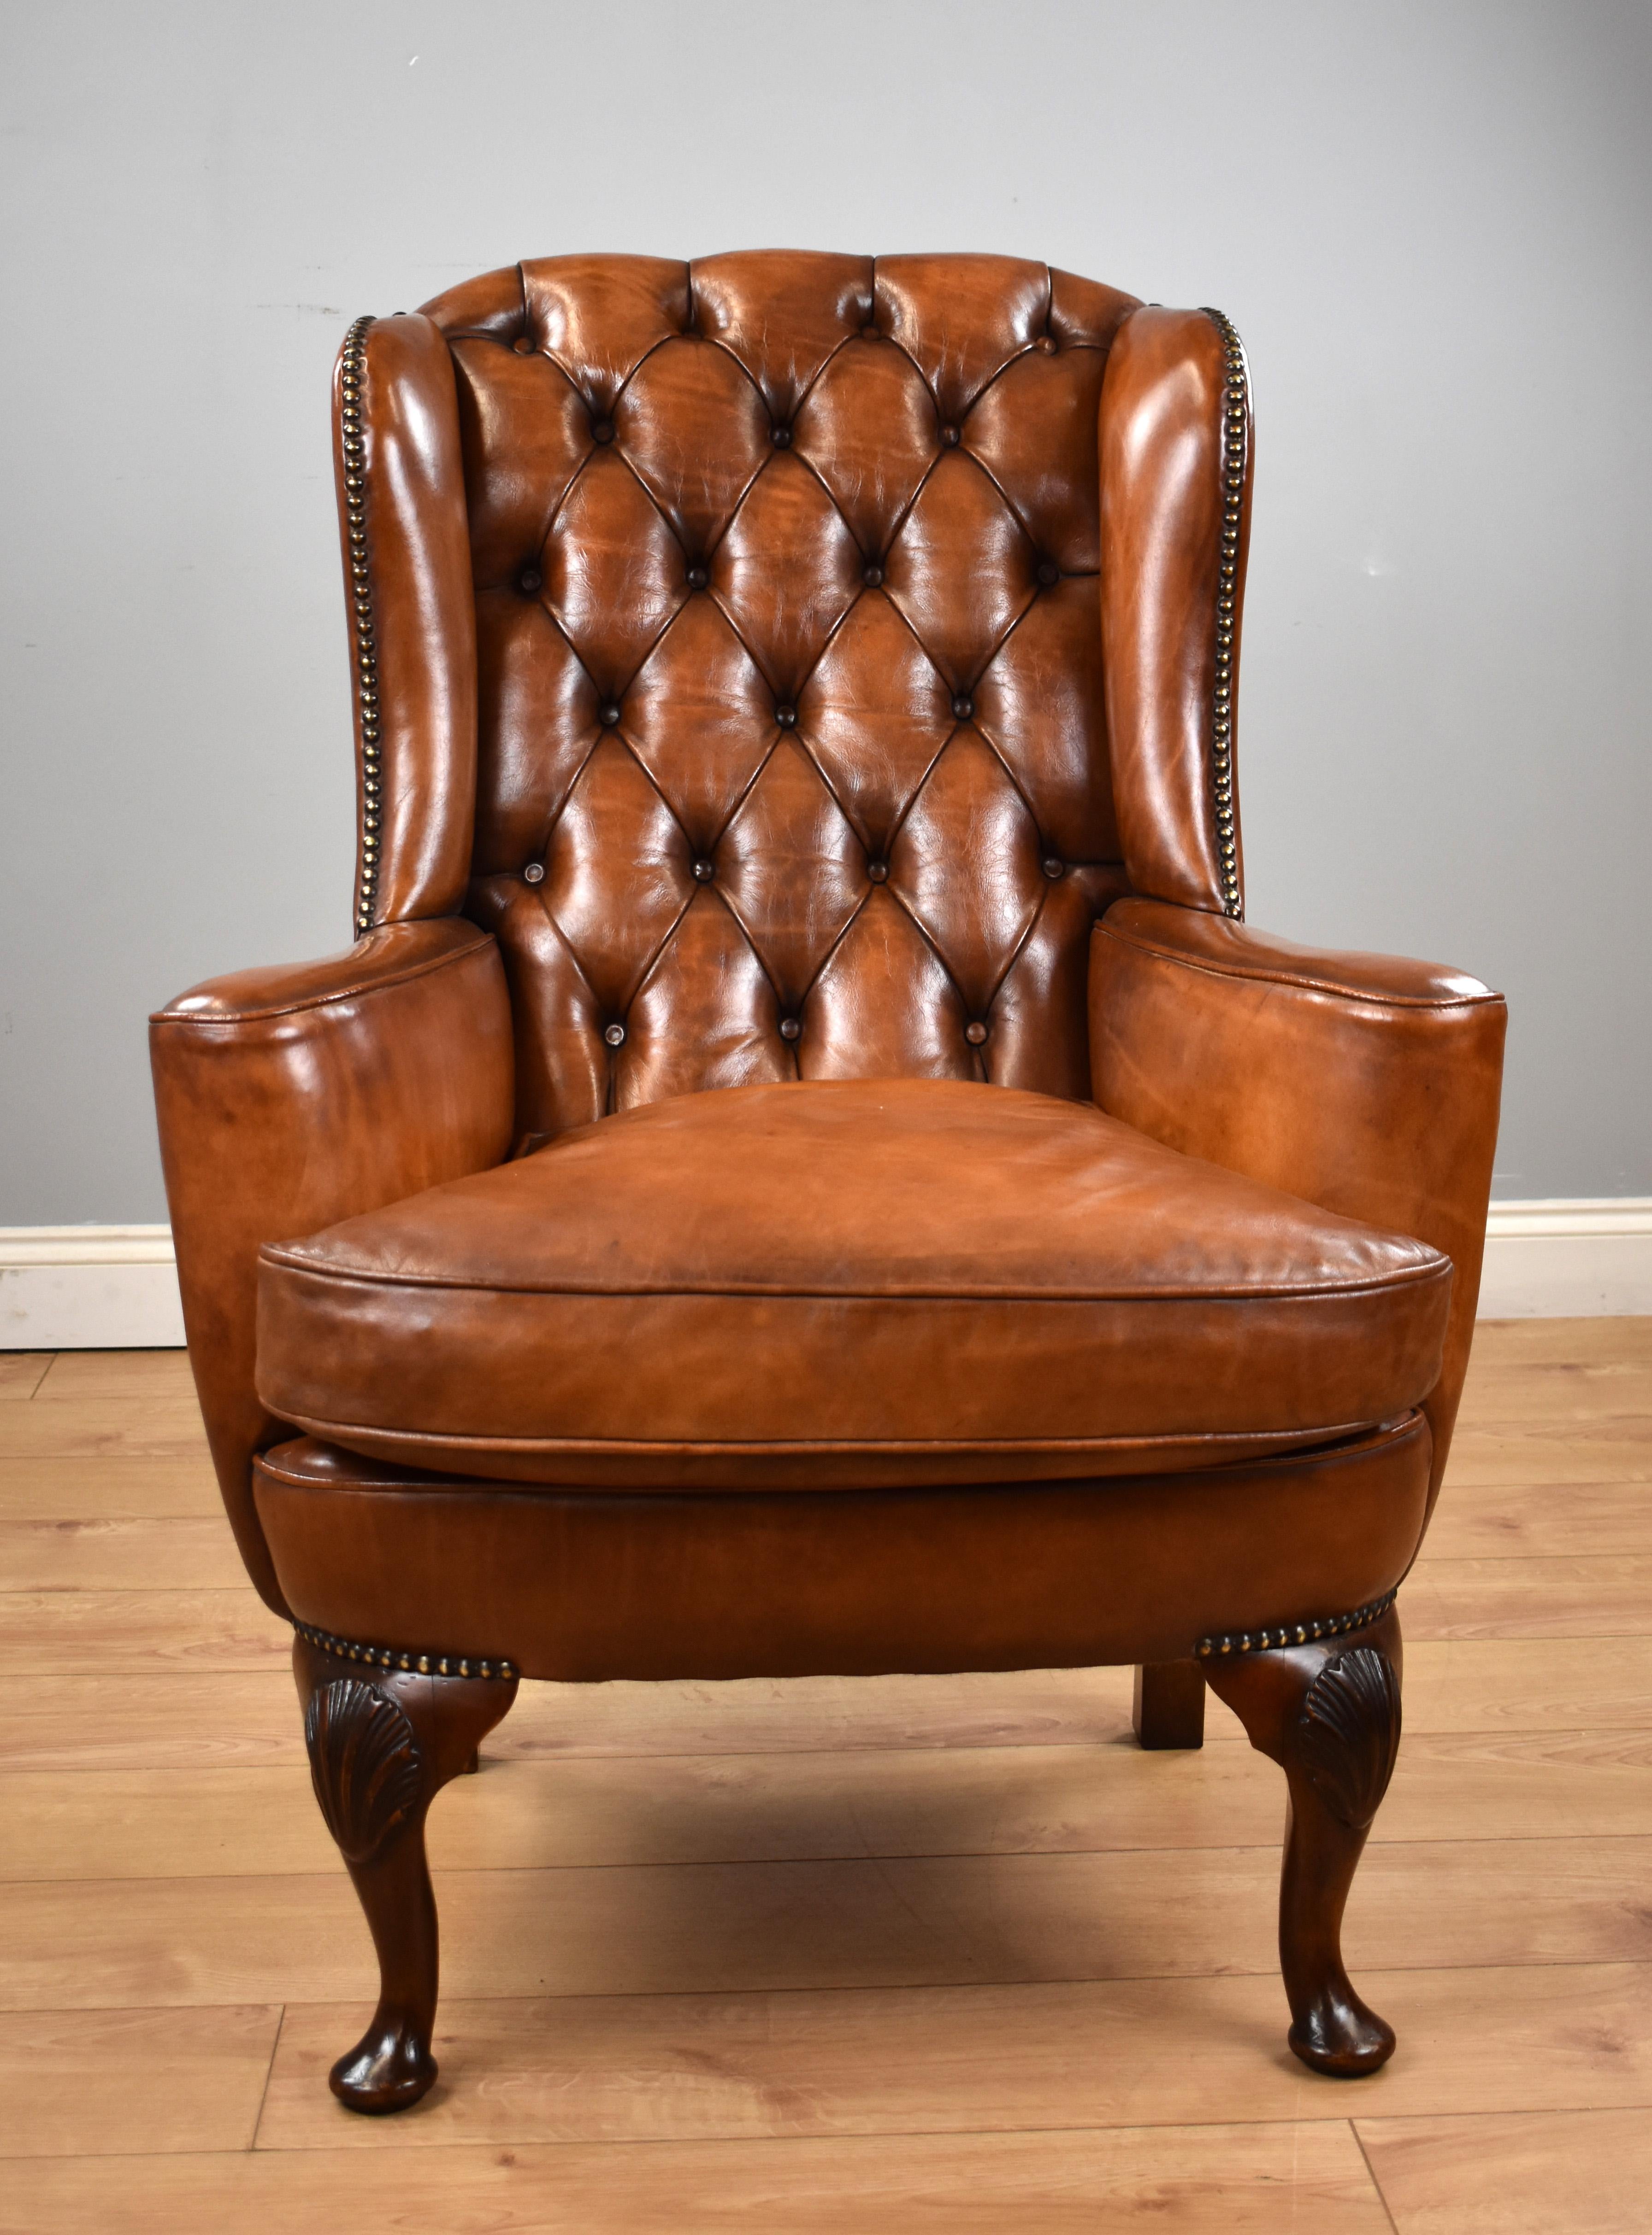 For sale is a good Victorian hand dyed leather wingback armchair, having a deep buttoned back flanked by a wing on either side, above a cushion with two sweeping arms. The chair stands on elegant cabriole legs with a carved shell on each knee and is